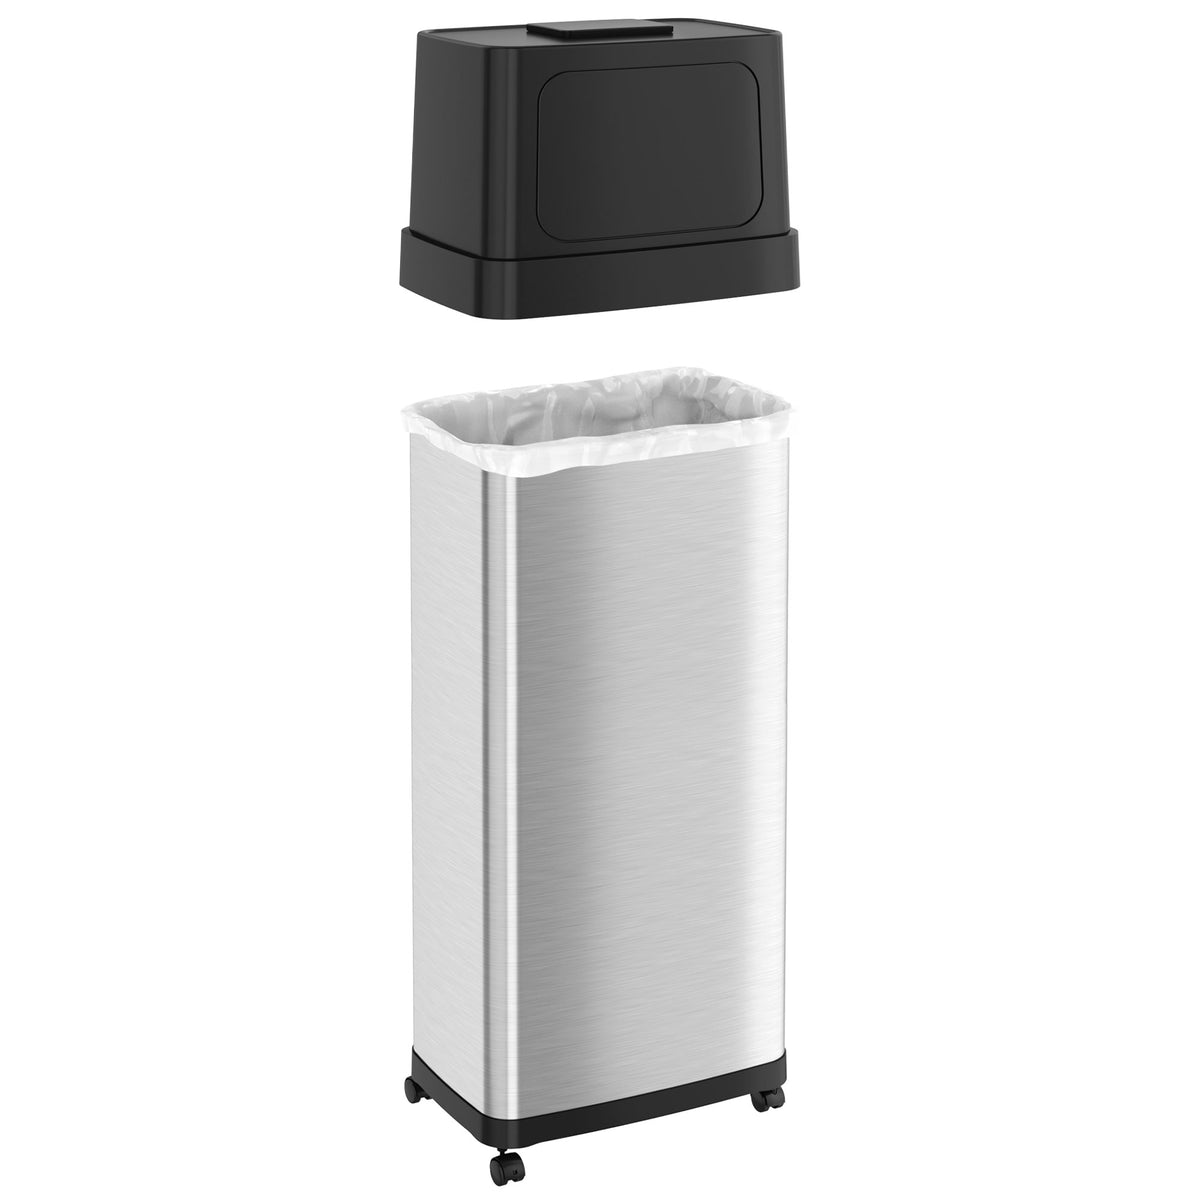 24 Gallon / 91 Liter Dual Push Door Trash Can with Wheels snug fit lid